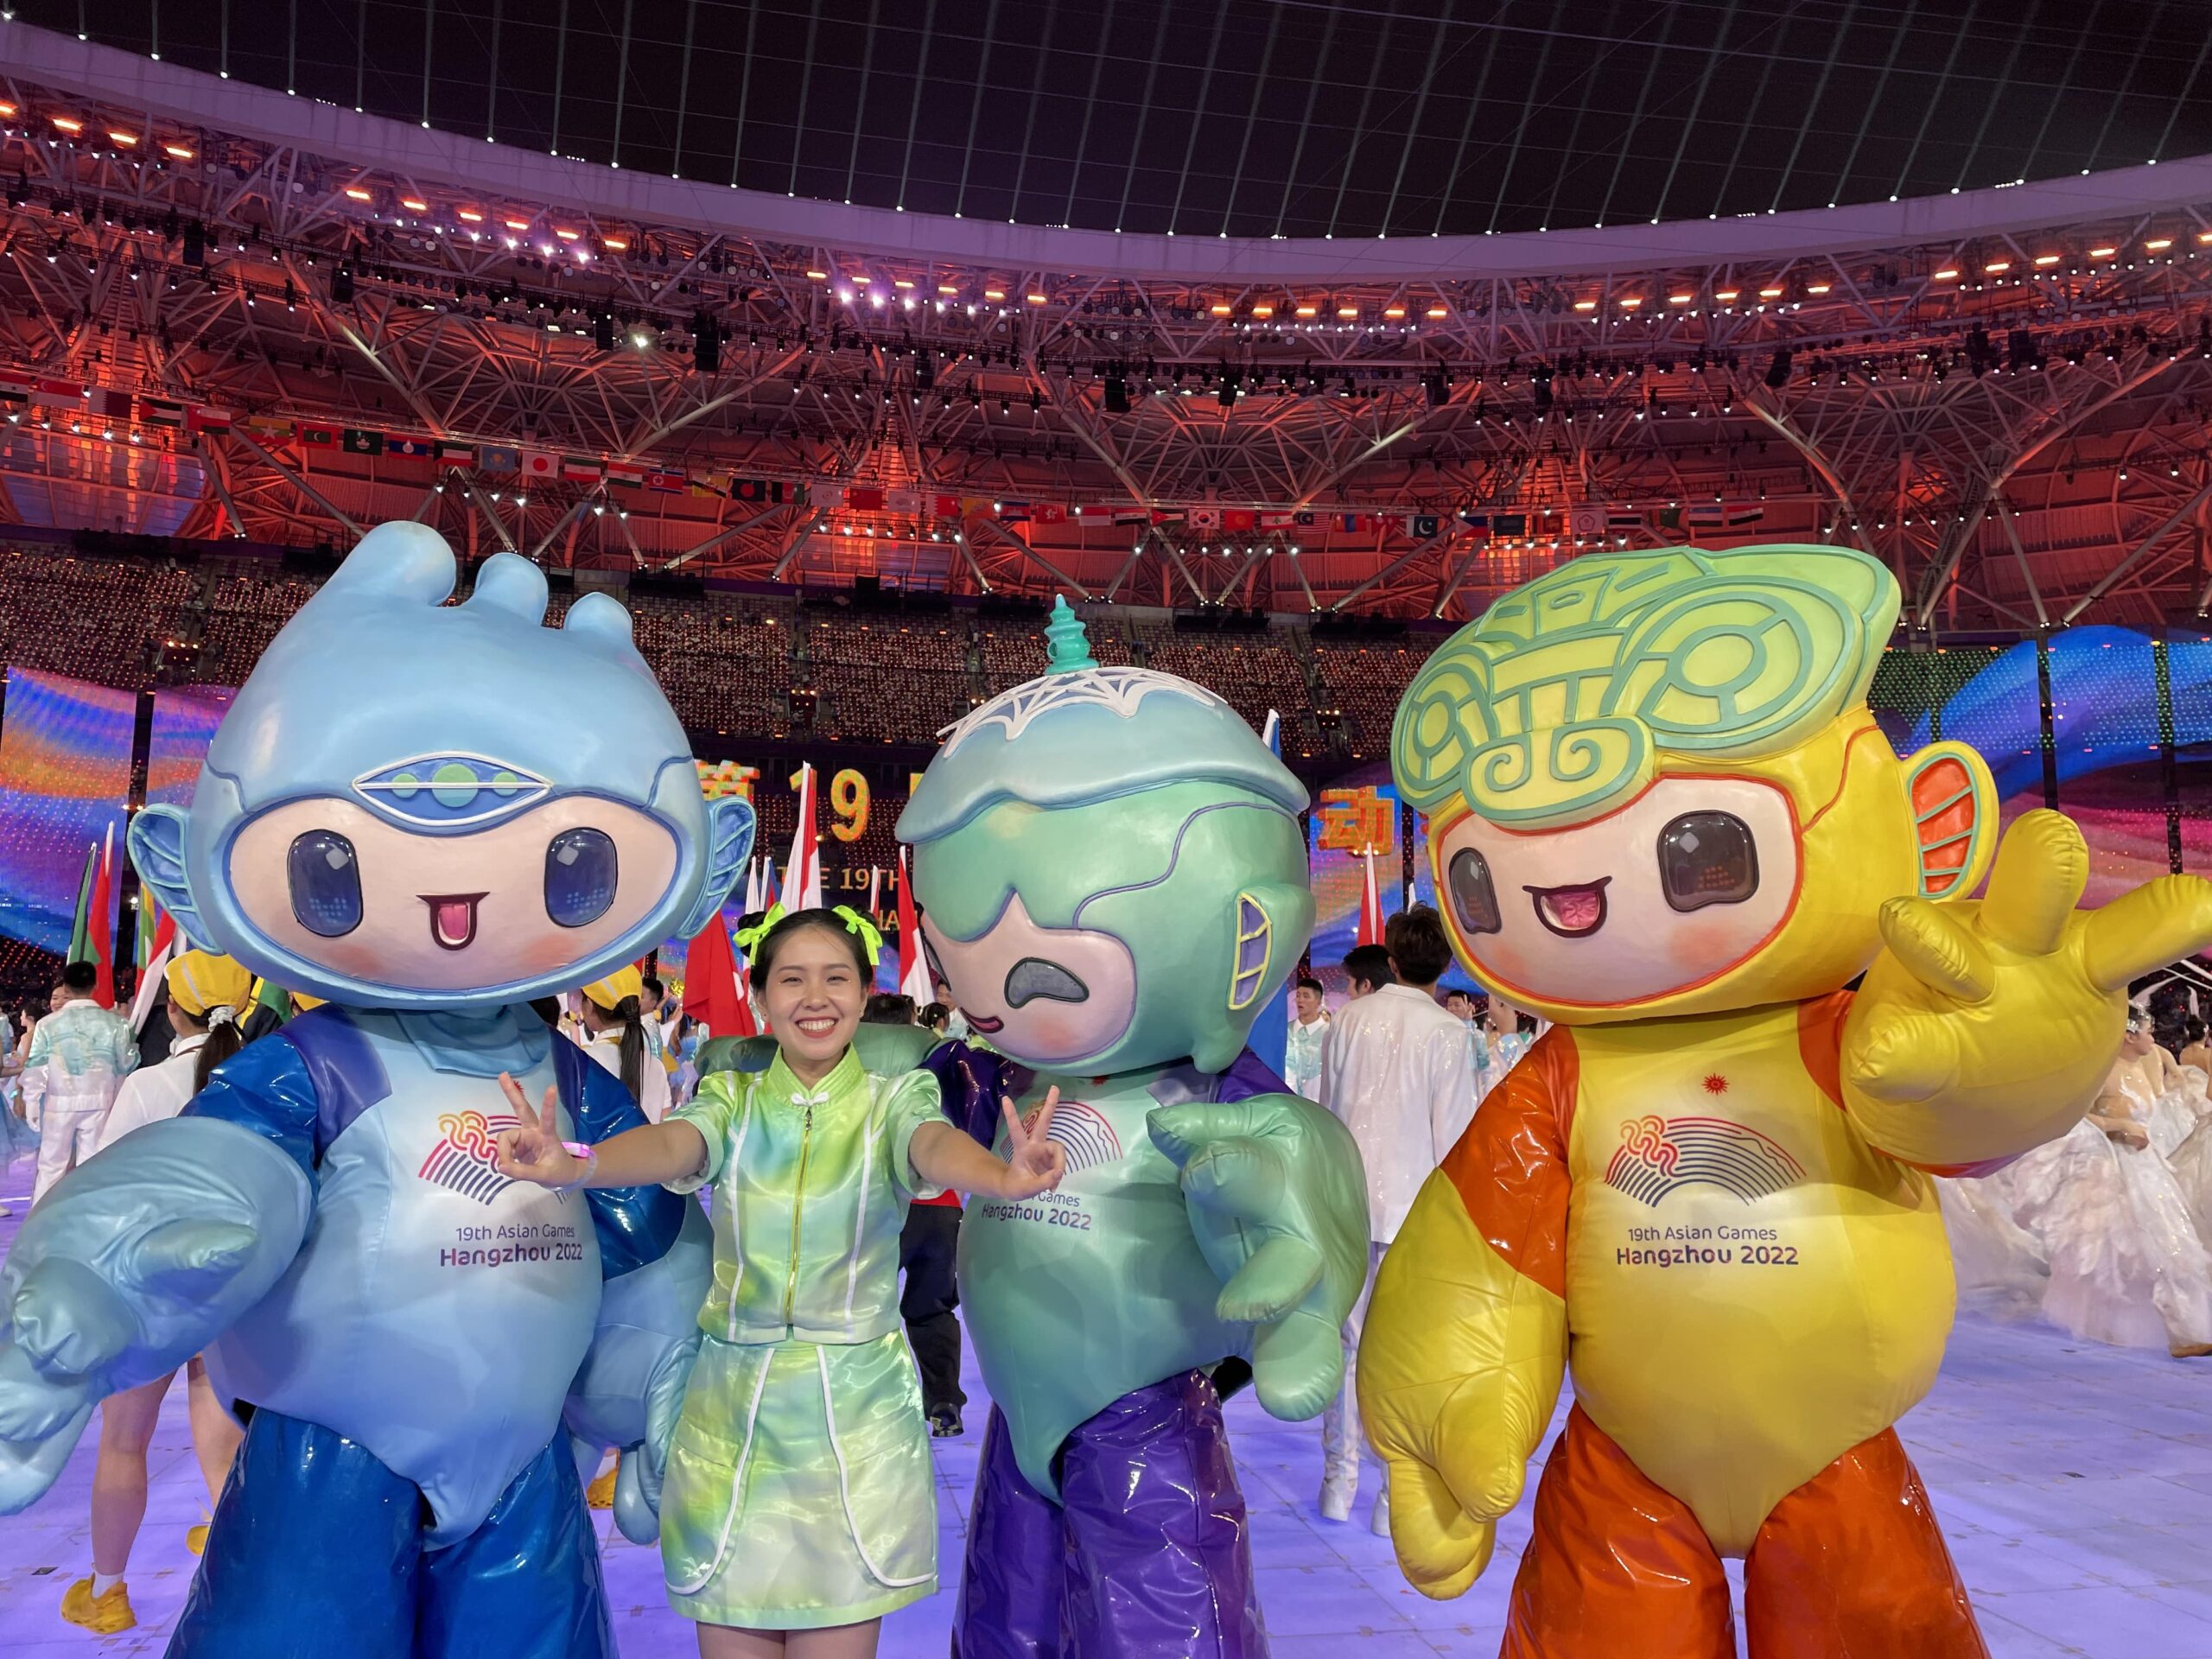 Zi hui, a malaysian performing at the hangzhou asian games with the mascots